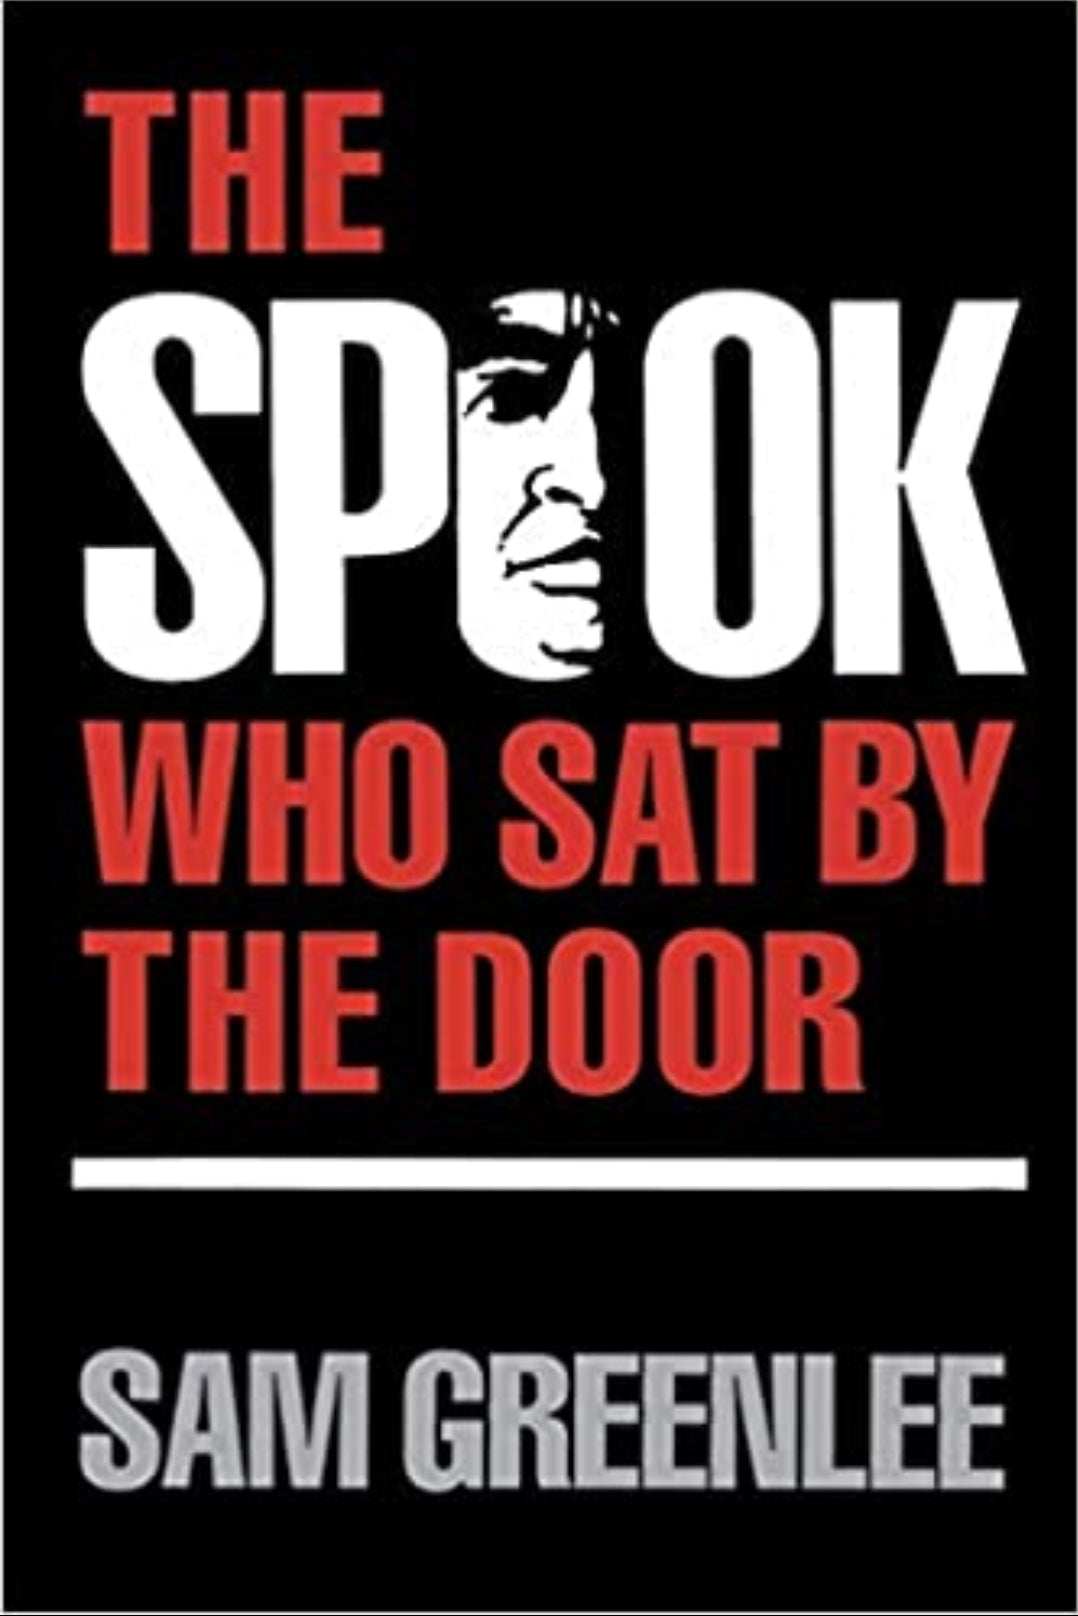 The Spook Who Sat By The Door by Sam Greenlee